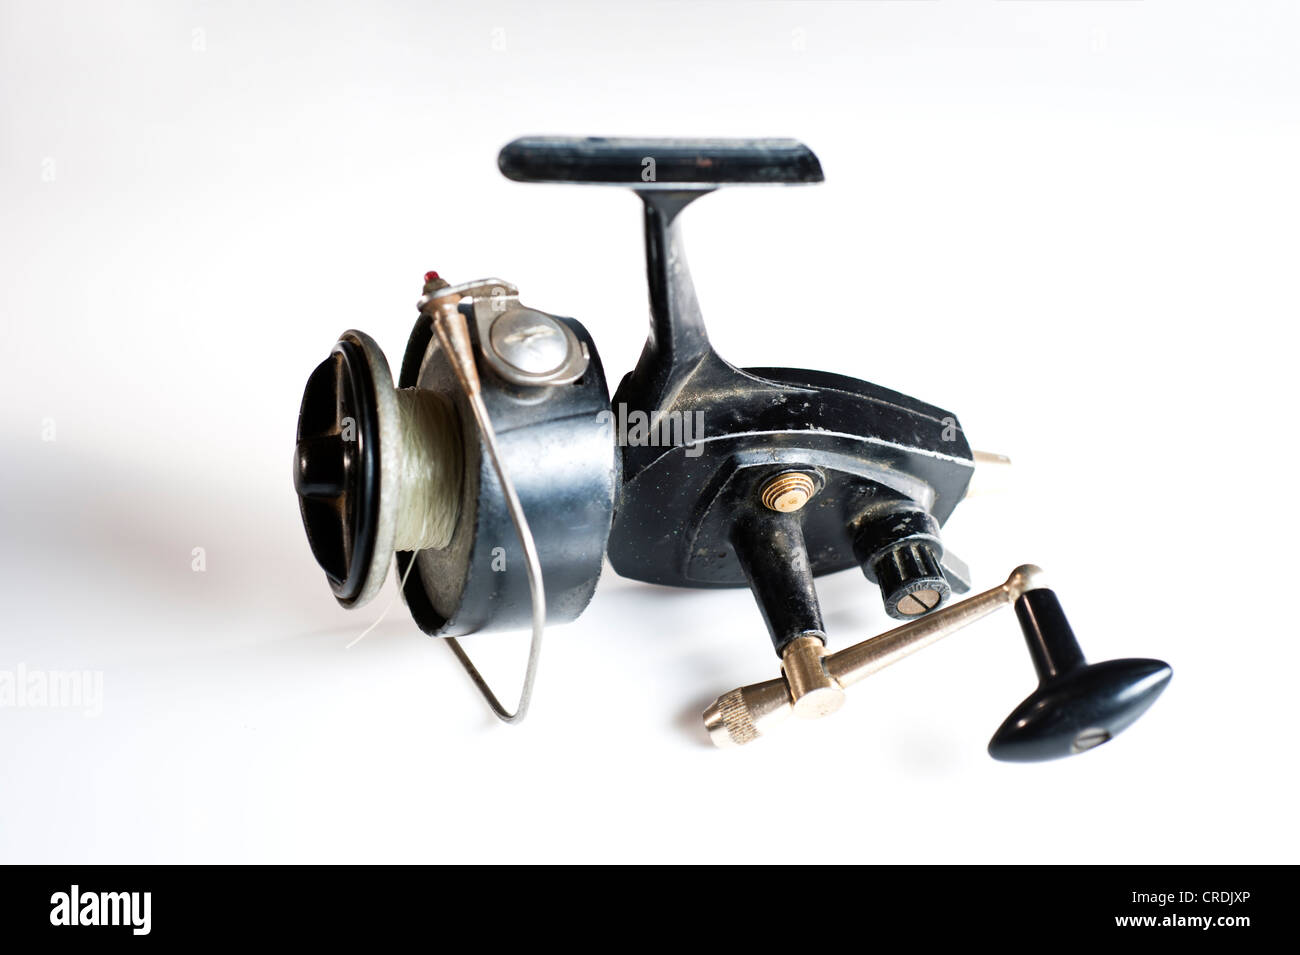 Vintage Fly Fishing Reel Stock Photo - Download Image Now